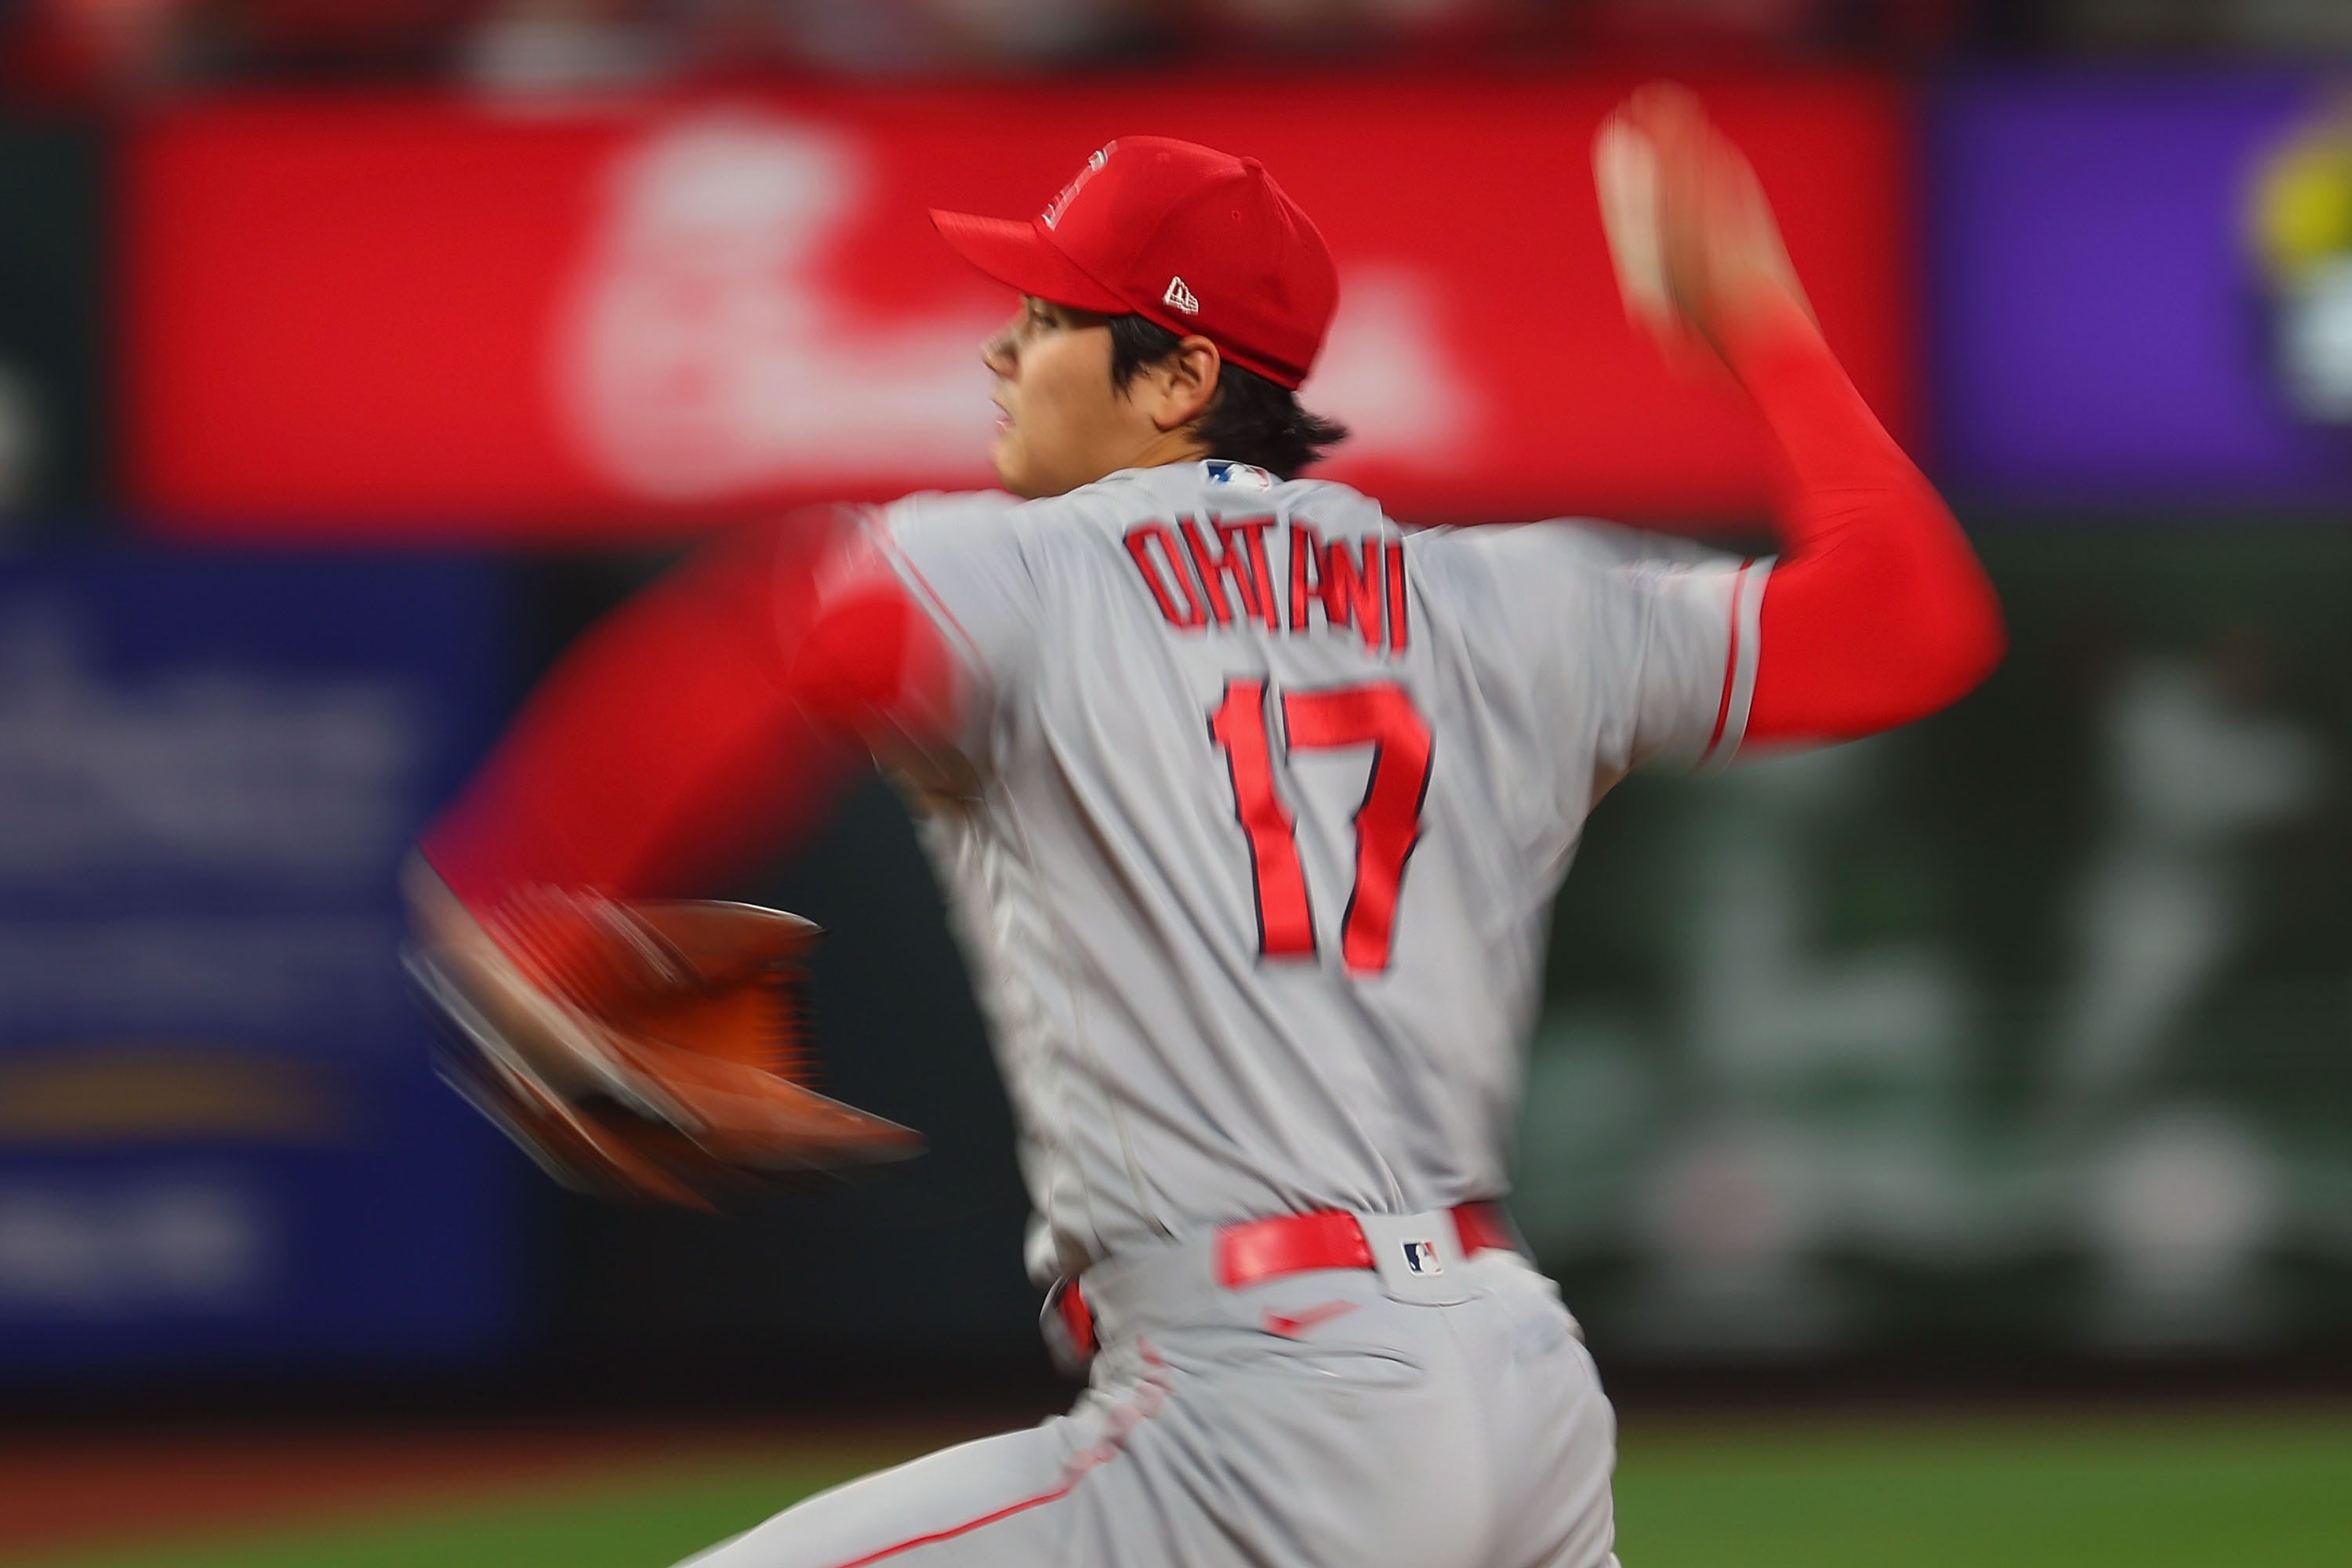 Mike Trout and Shohei Ohtani Tie Fun History at Top of Los Angeles